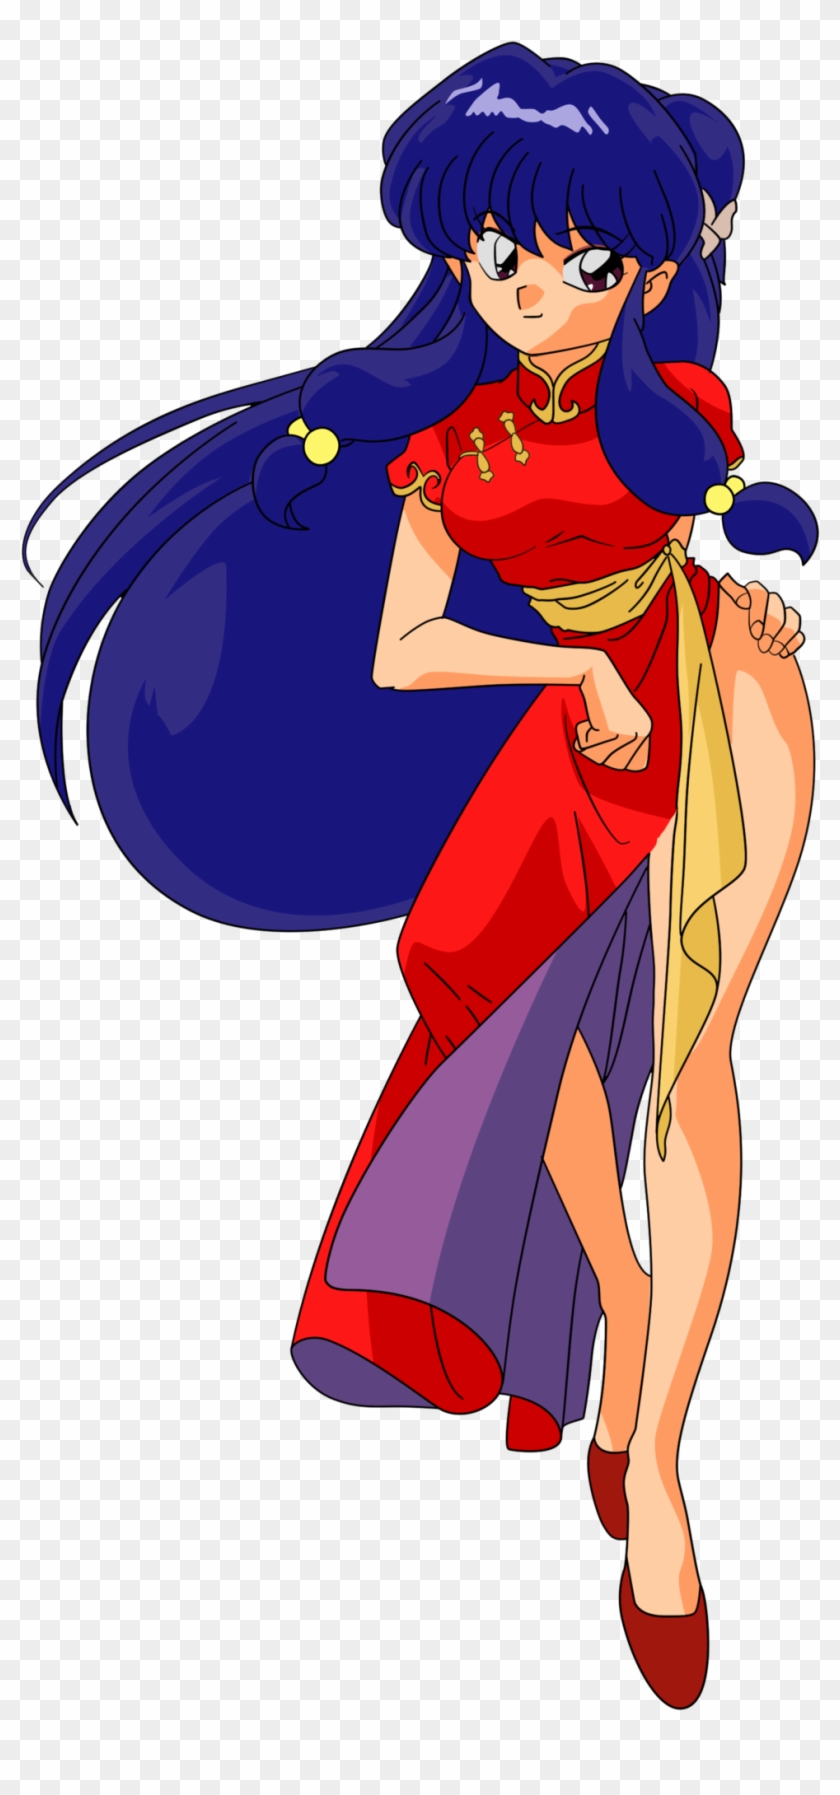 Shampoo Chan Fan Art 10 By Gaslam Shampoo Ranma 1 2 Free Transparent Png Clipart Images Download By brmk22, posted 10 years ago traditional artist. shampoo chan fan art 10 by gaslam